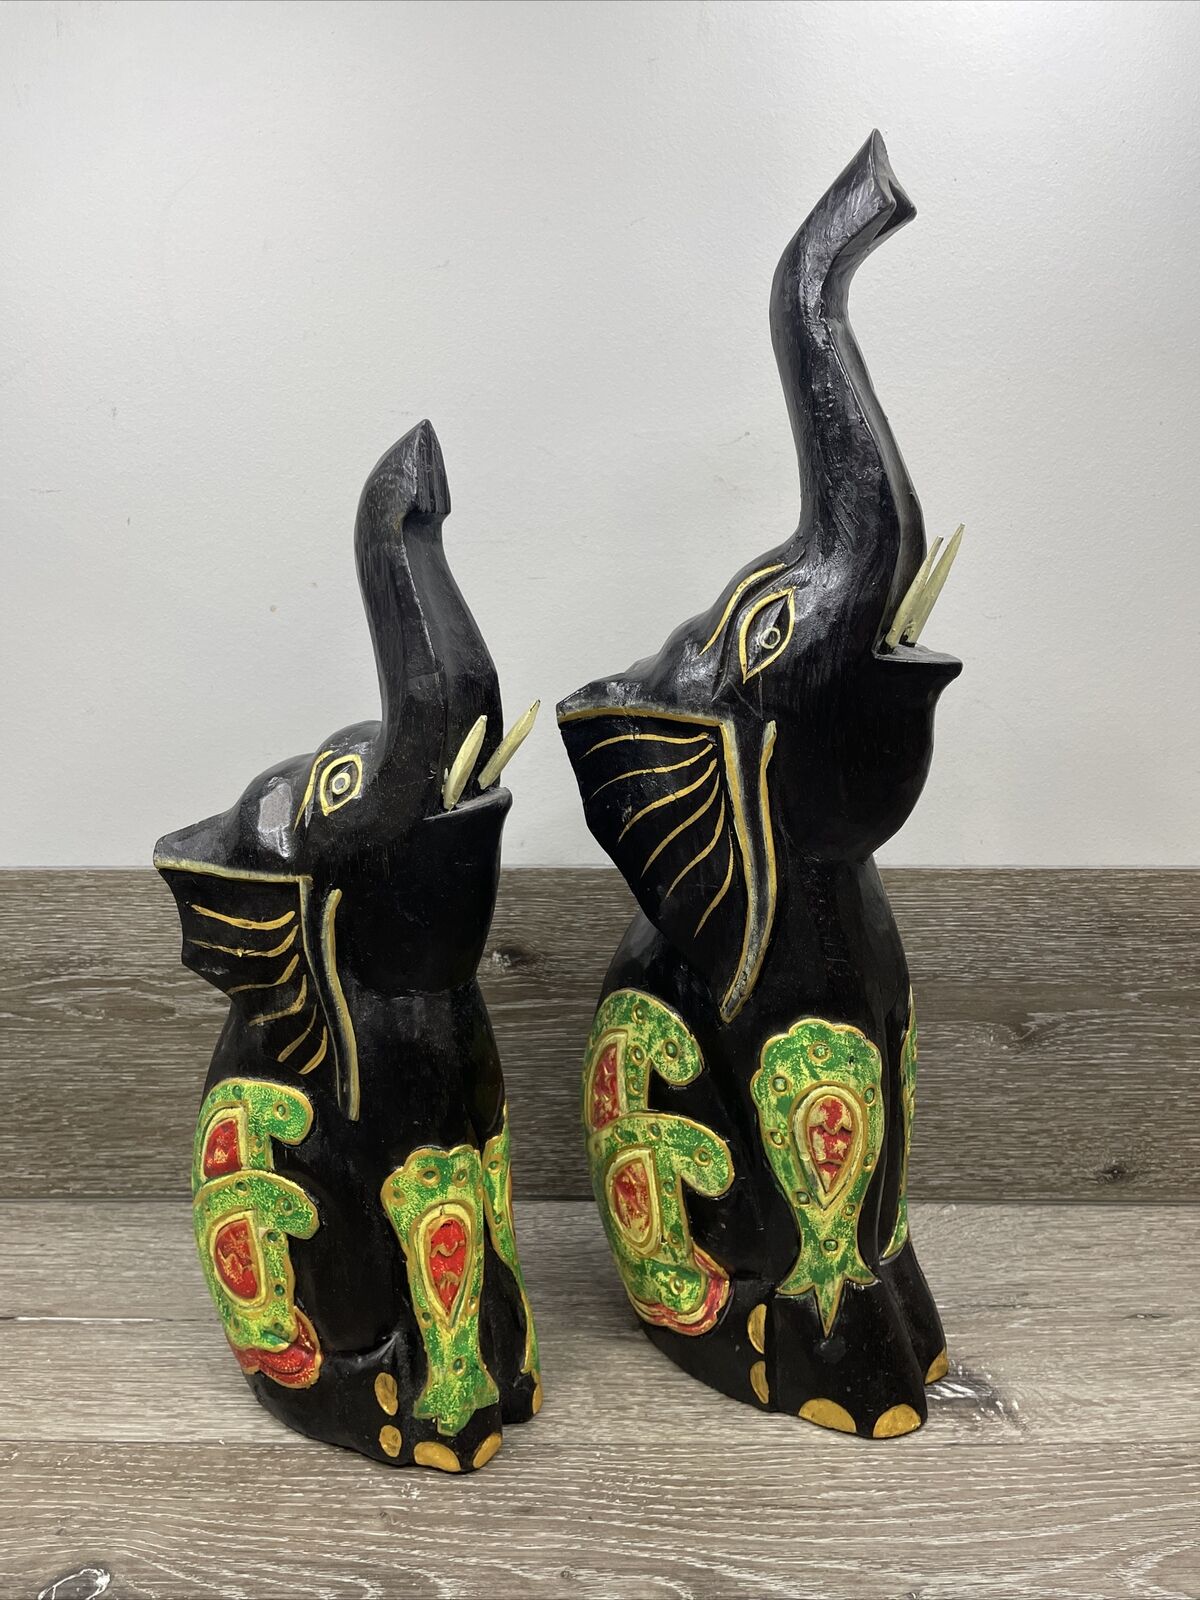 Set of 2 Wooden Handcrafted Trunk Up Asian Elephant Figurines 19” Indonesia